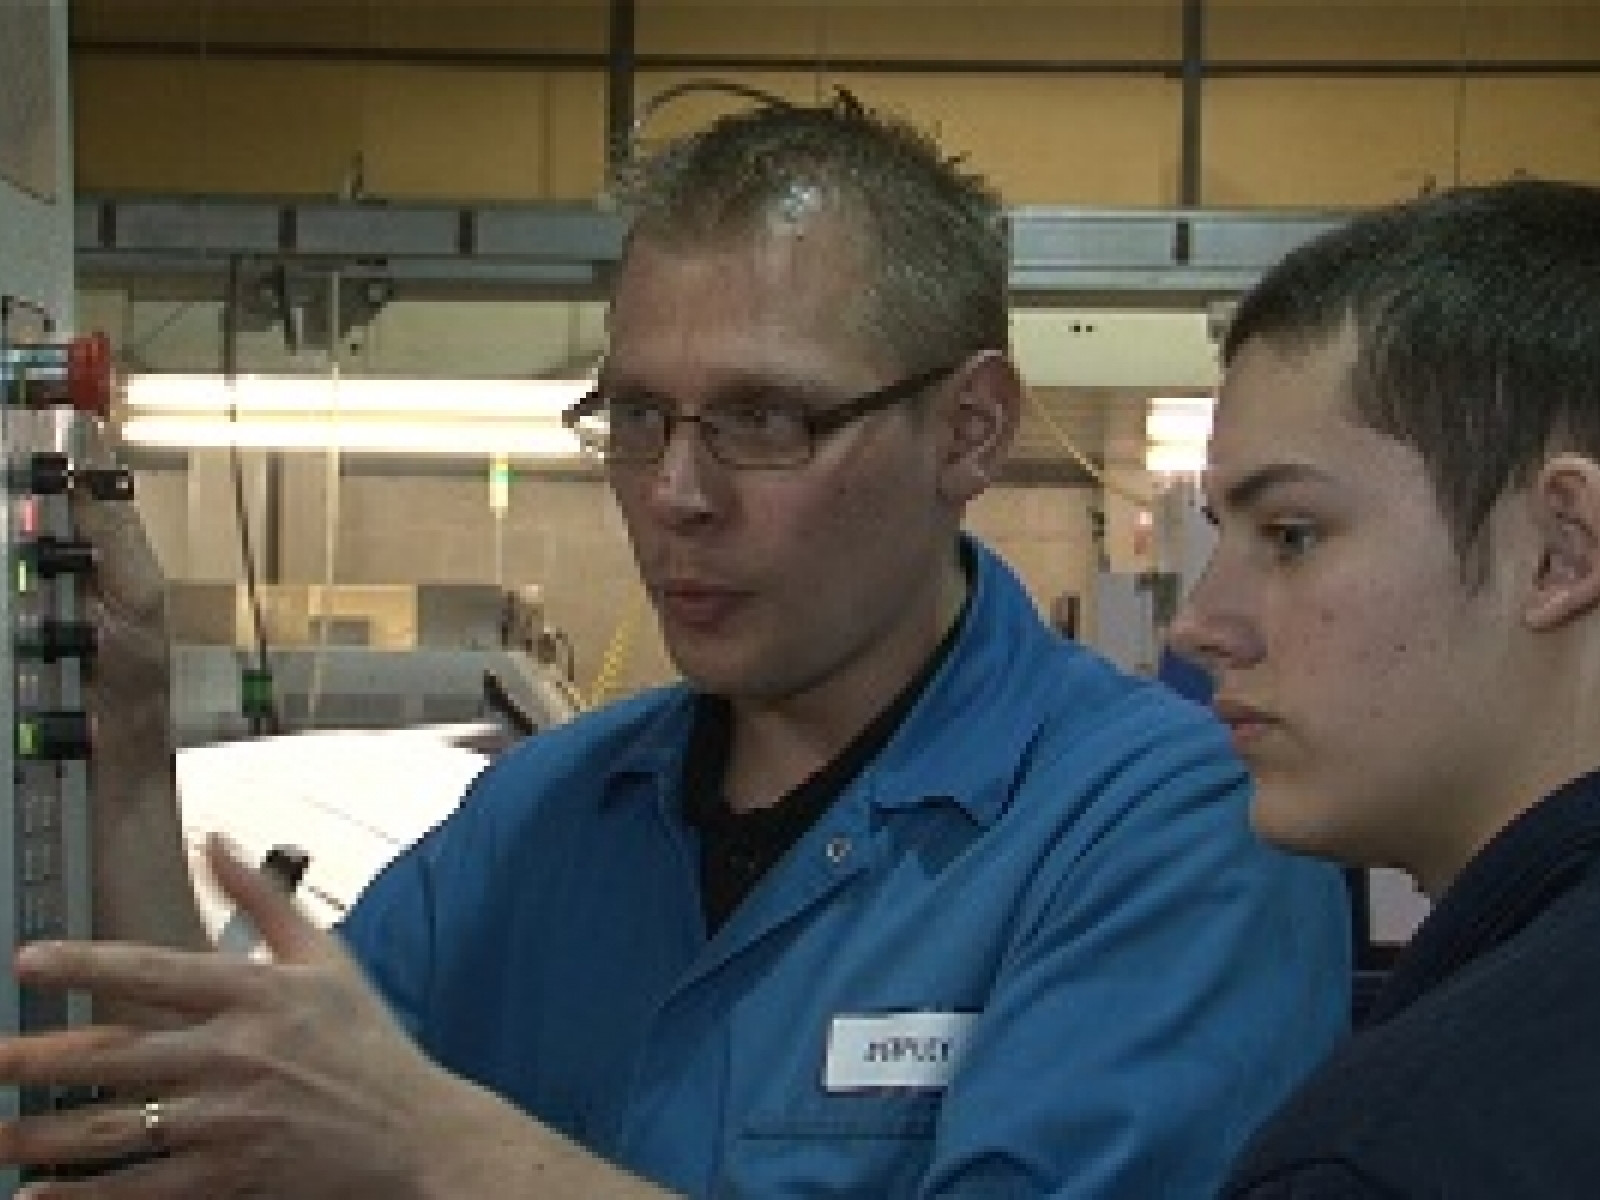 Machined Component Systems grow their own talent